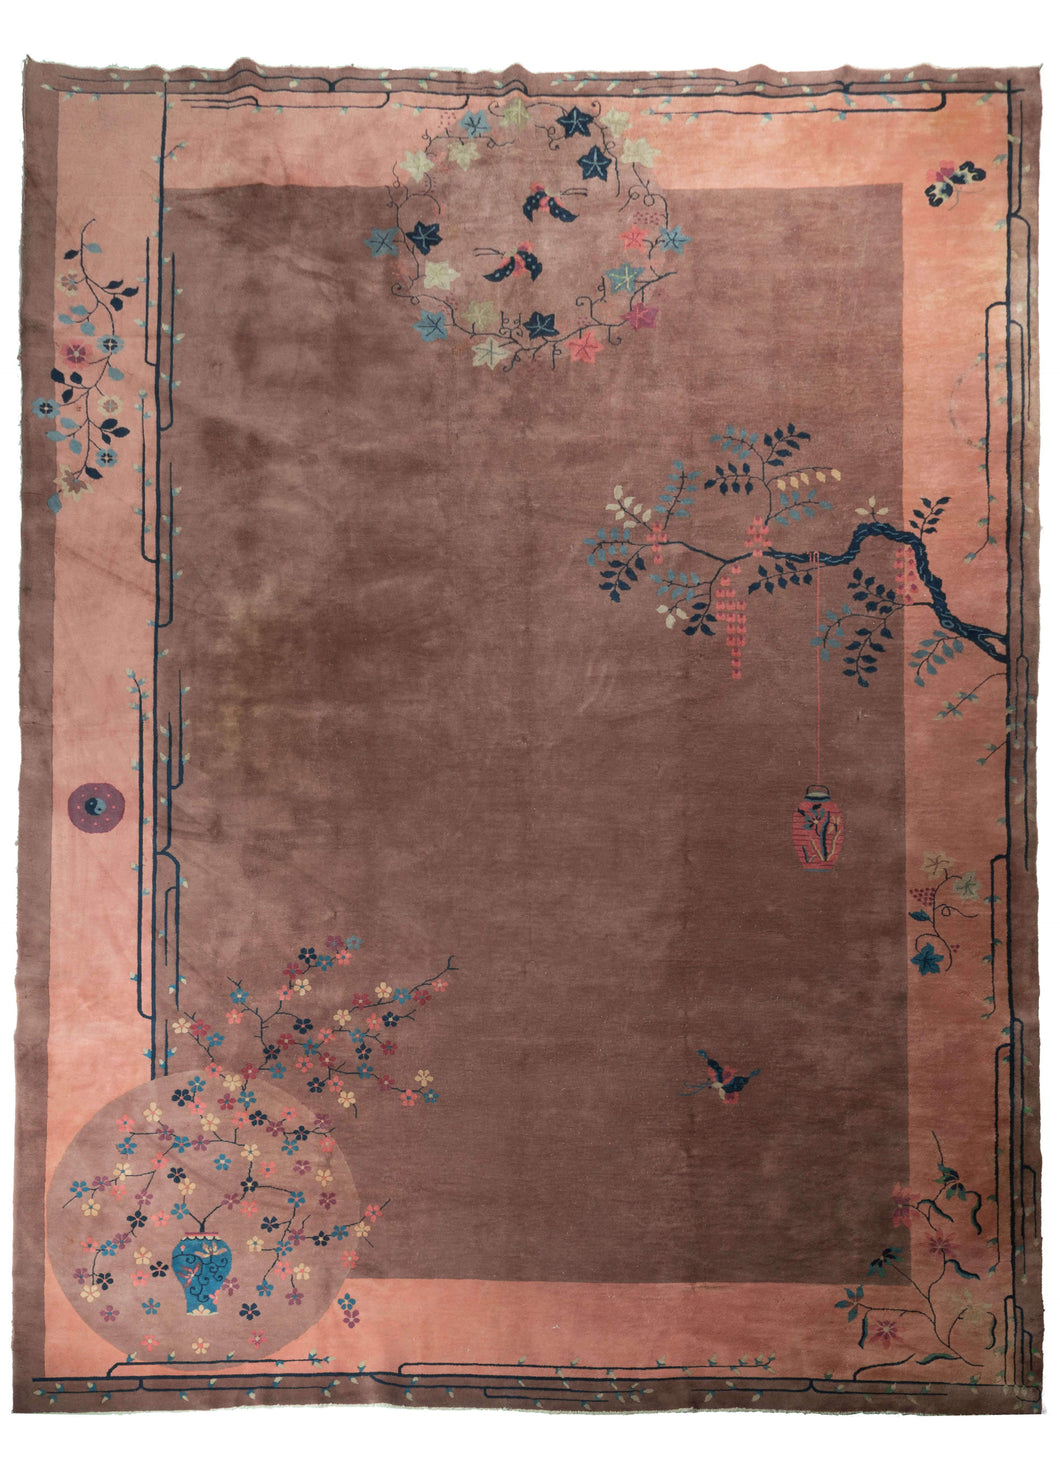 Chinese Deco rug that features a calm mauve ground with a soft coral border. The design is directional and whimsical which is not restrained by the border. In the bottom left is an orb containing a vase with branches full of multicolor rosettes. A flowering branch grows form the right side with a hanging lantern. A single, small yin-yang symbol is seen in the border on the left hand side.